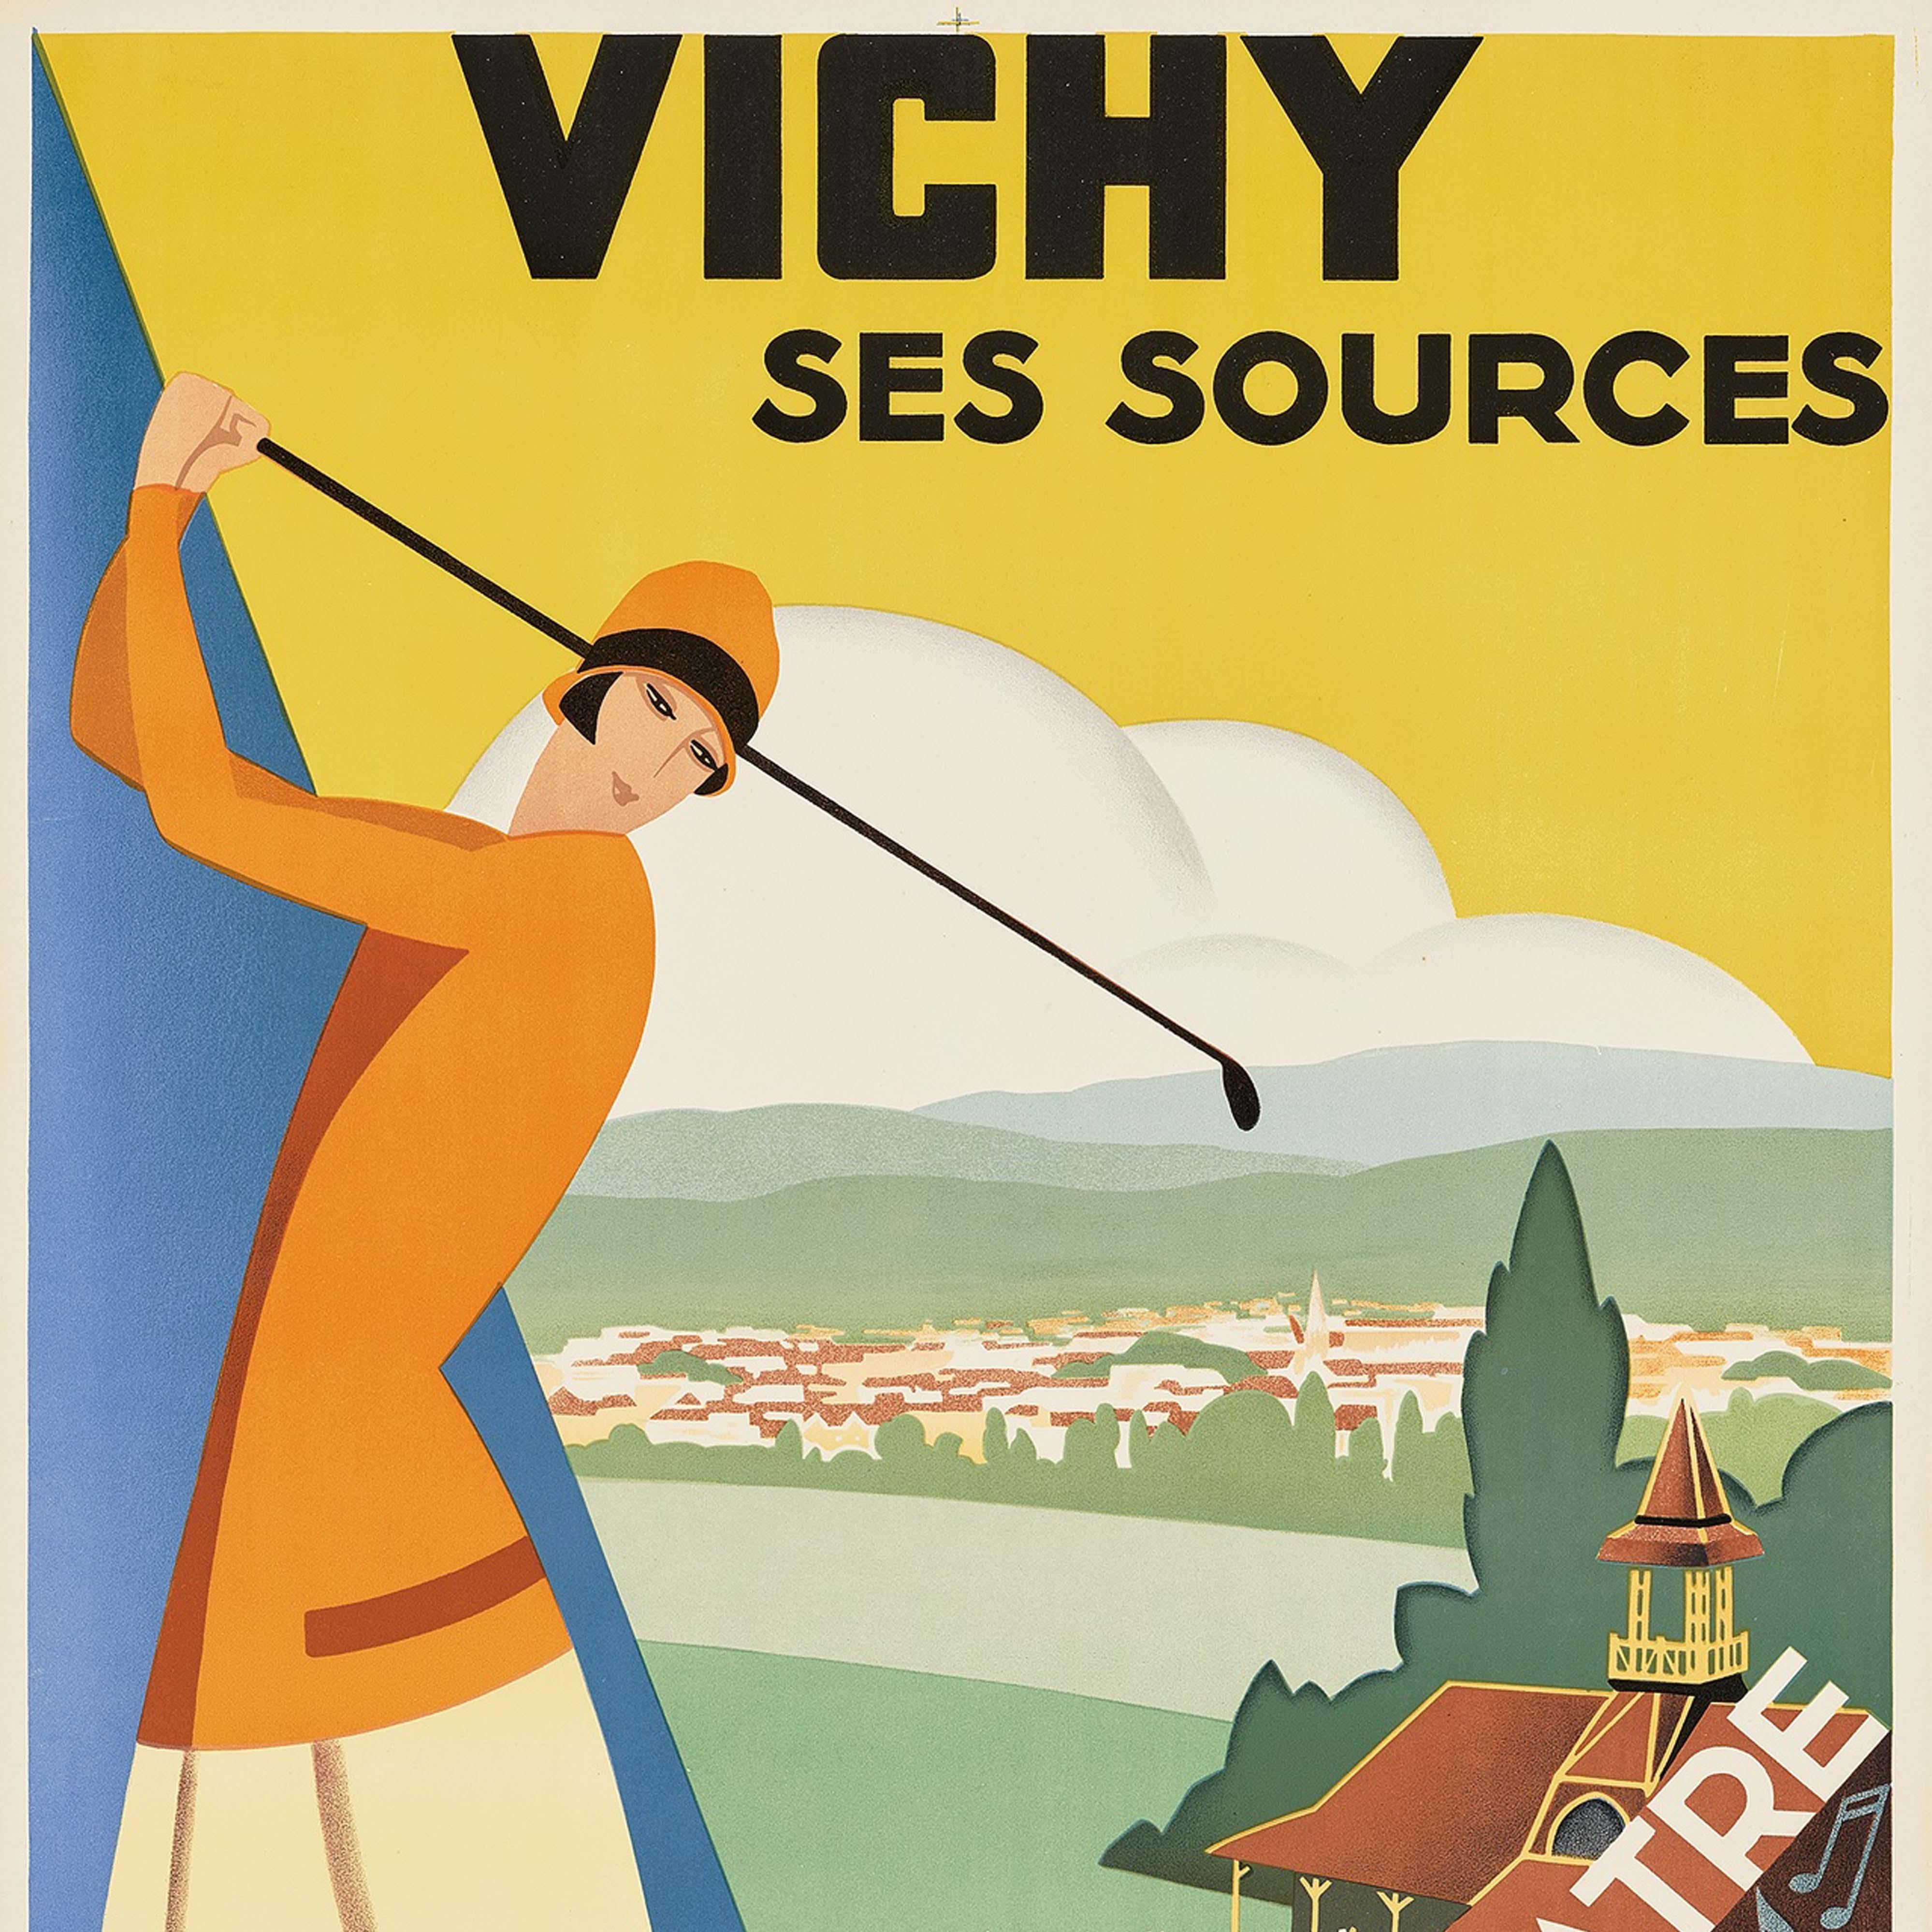 Original vintage PLM Paris Lyon Mediterranee railway travel poster for sport tourism and theatre in the historical spa resort town in the Auvergne Rhone Alpes region of central France - Vichy ses Sources Sports Tourisme Theatre. Stunning Art Deco